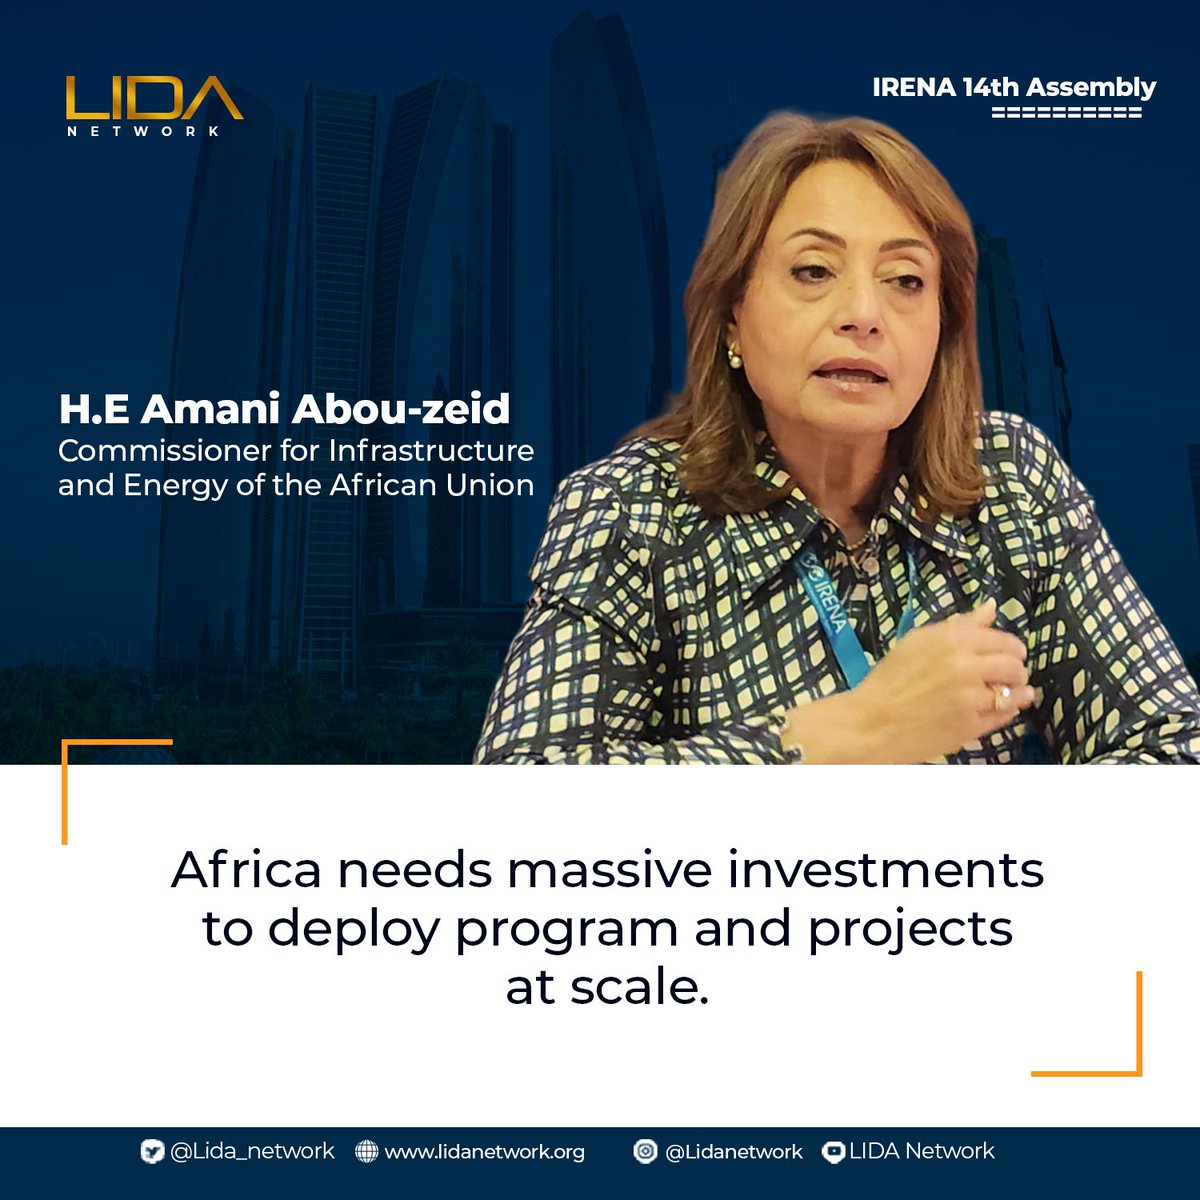 Africa's bright future hinges on massive investments in energy infrastructure! , @HEDrAbouZeid Commissioner for Infrastructure and Energy of the @_AfricanUnion, emphasized the urgent need at @IRENA to deploy programs & projects at scale. #IRENA4A